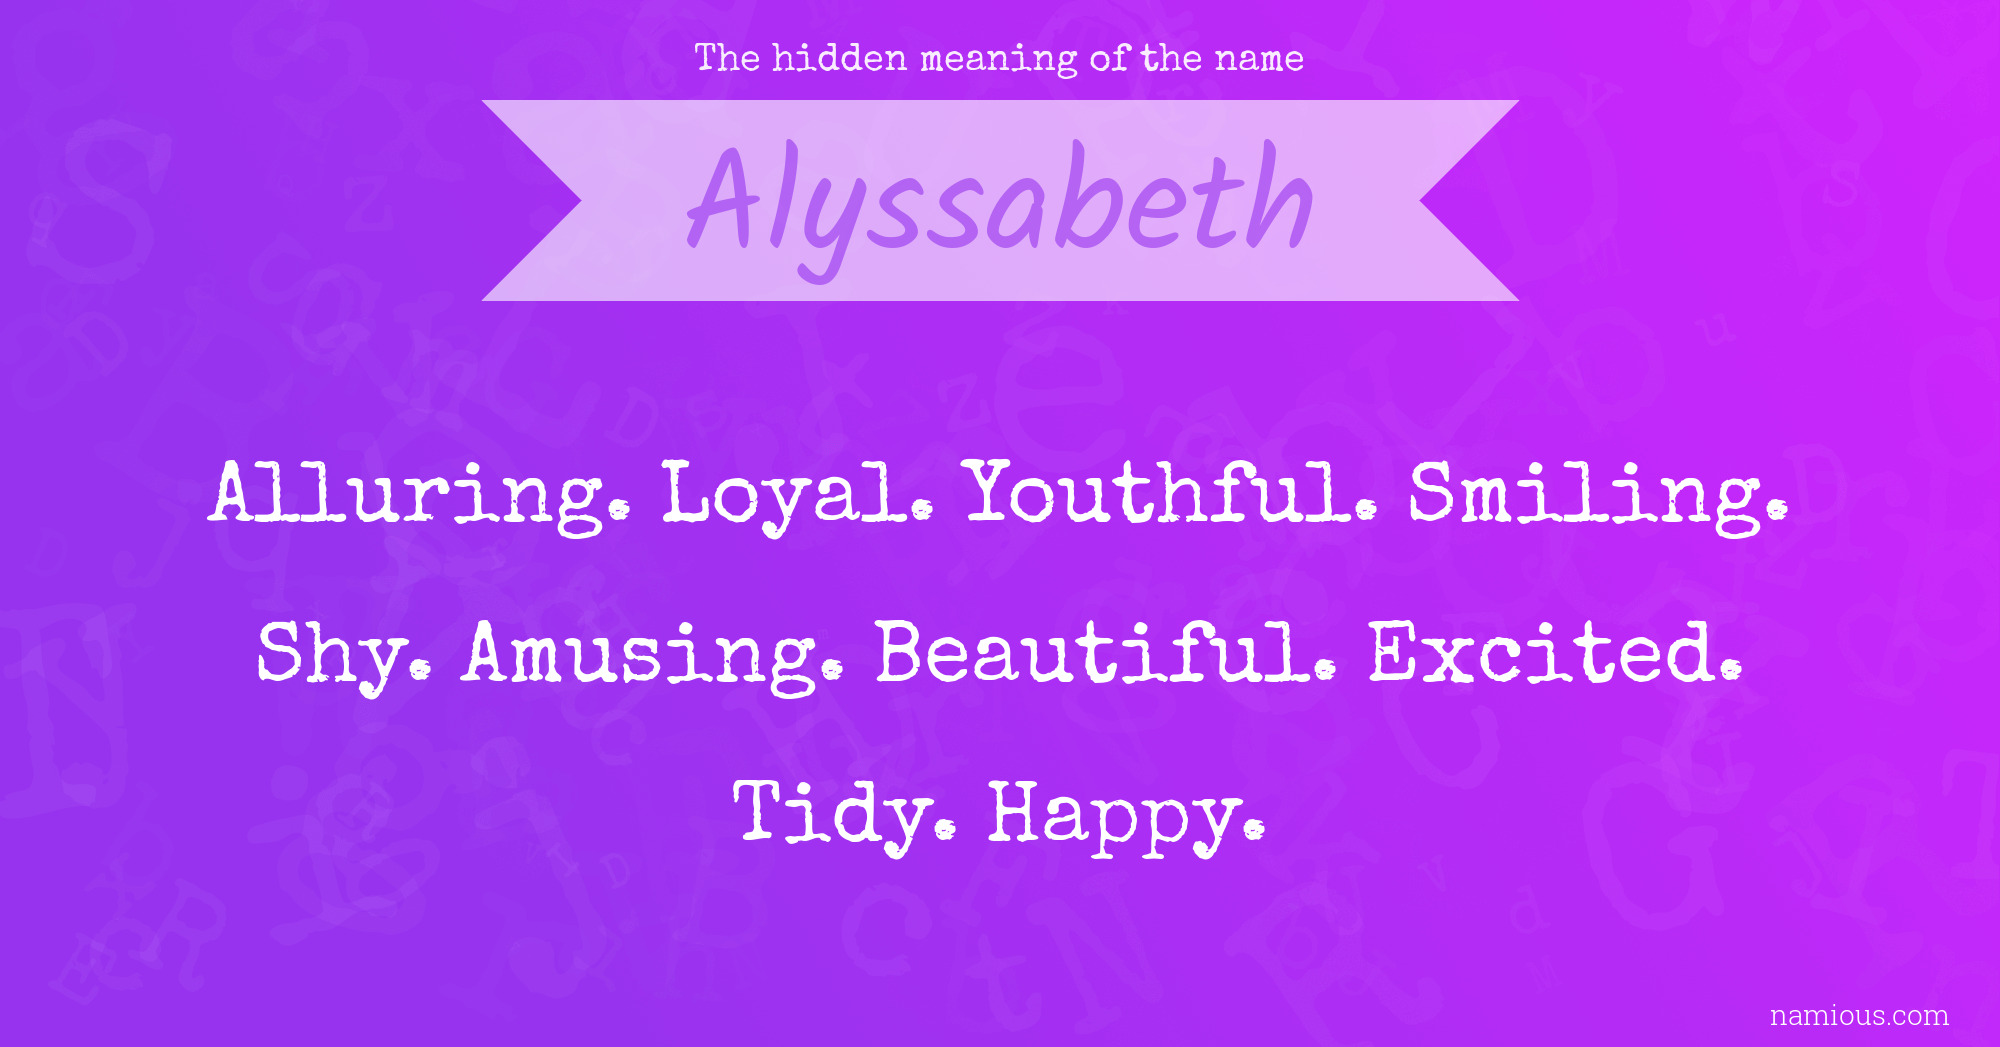 The hidden meaning of the name Alyssabeth